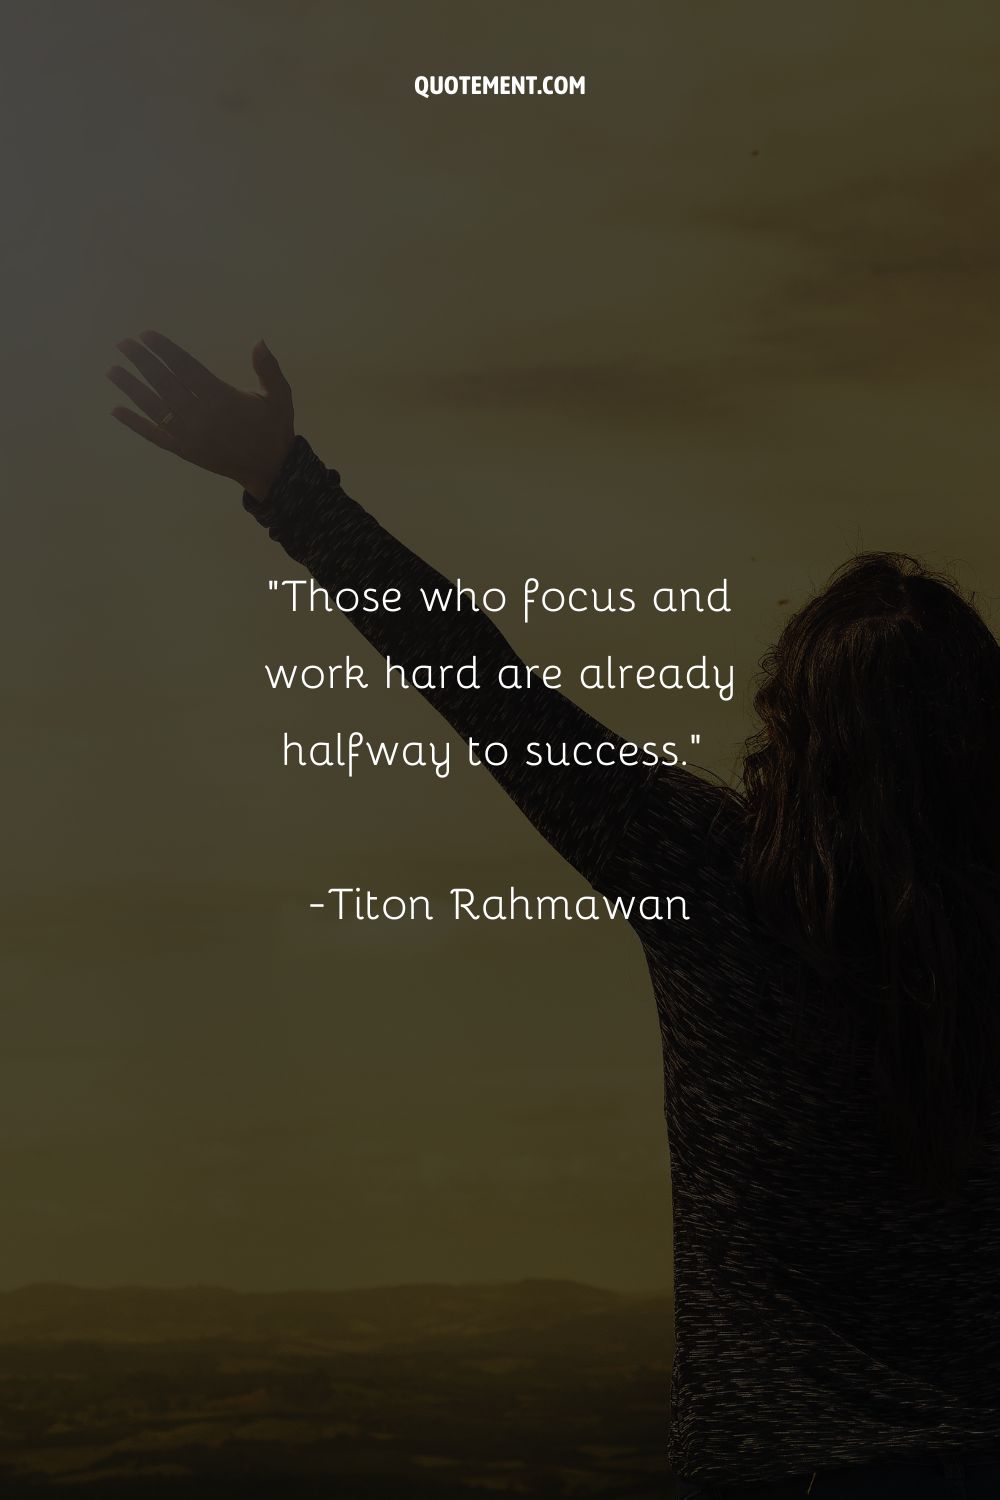 Those who focus and work hard are already halfway to success